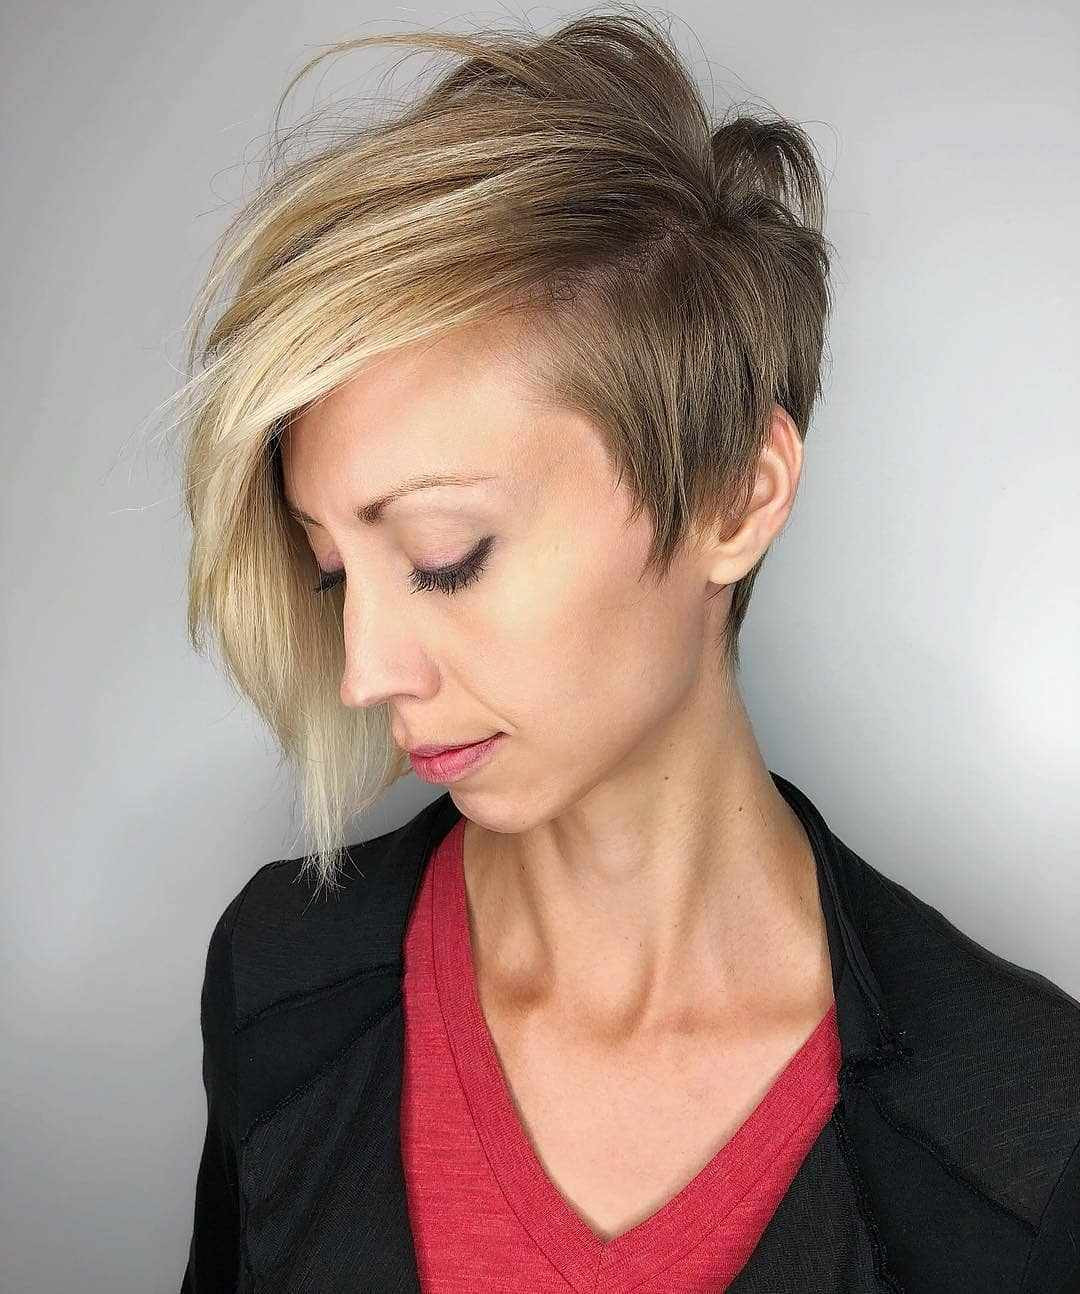 Short Hairstyles For Fine Hair Women
 Layered Short Haircuts for Women with Fine Hair 2019